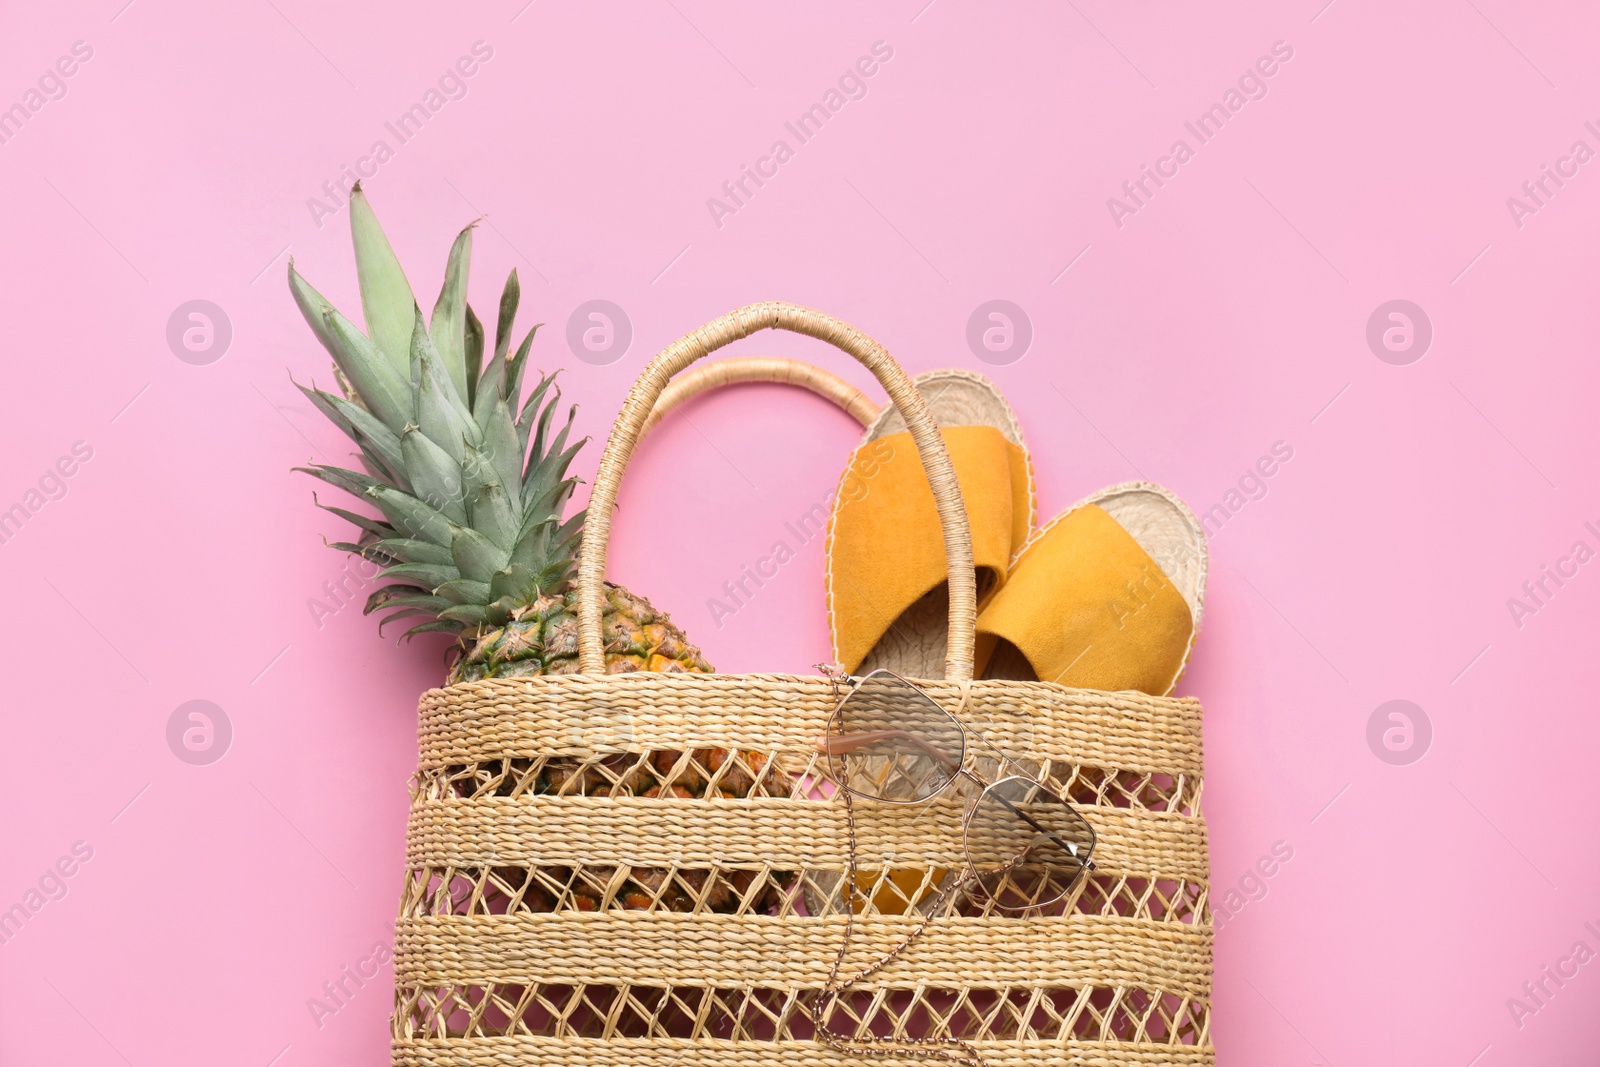 Photo of Elegant woman's straw bag with shoes, sunglasses and pineapple on pink background, top view